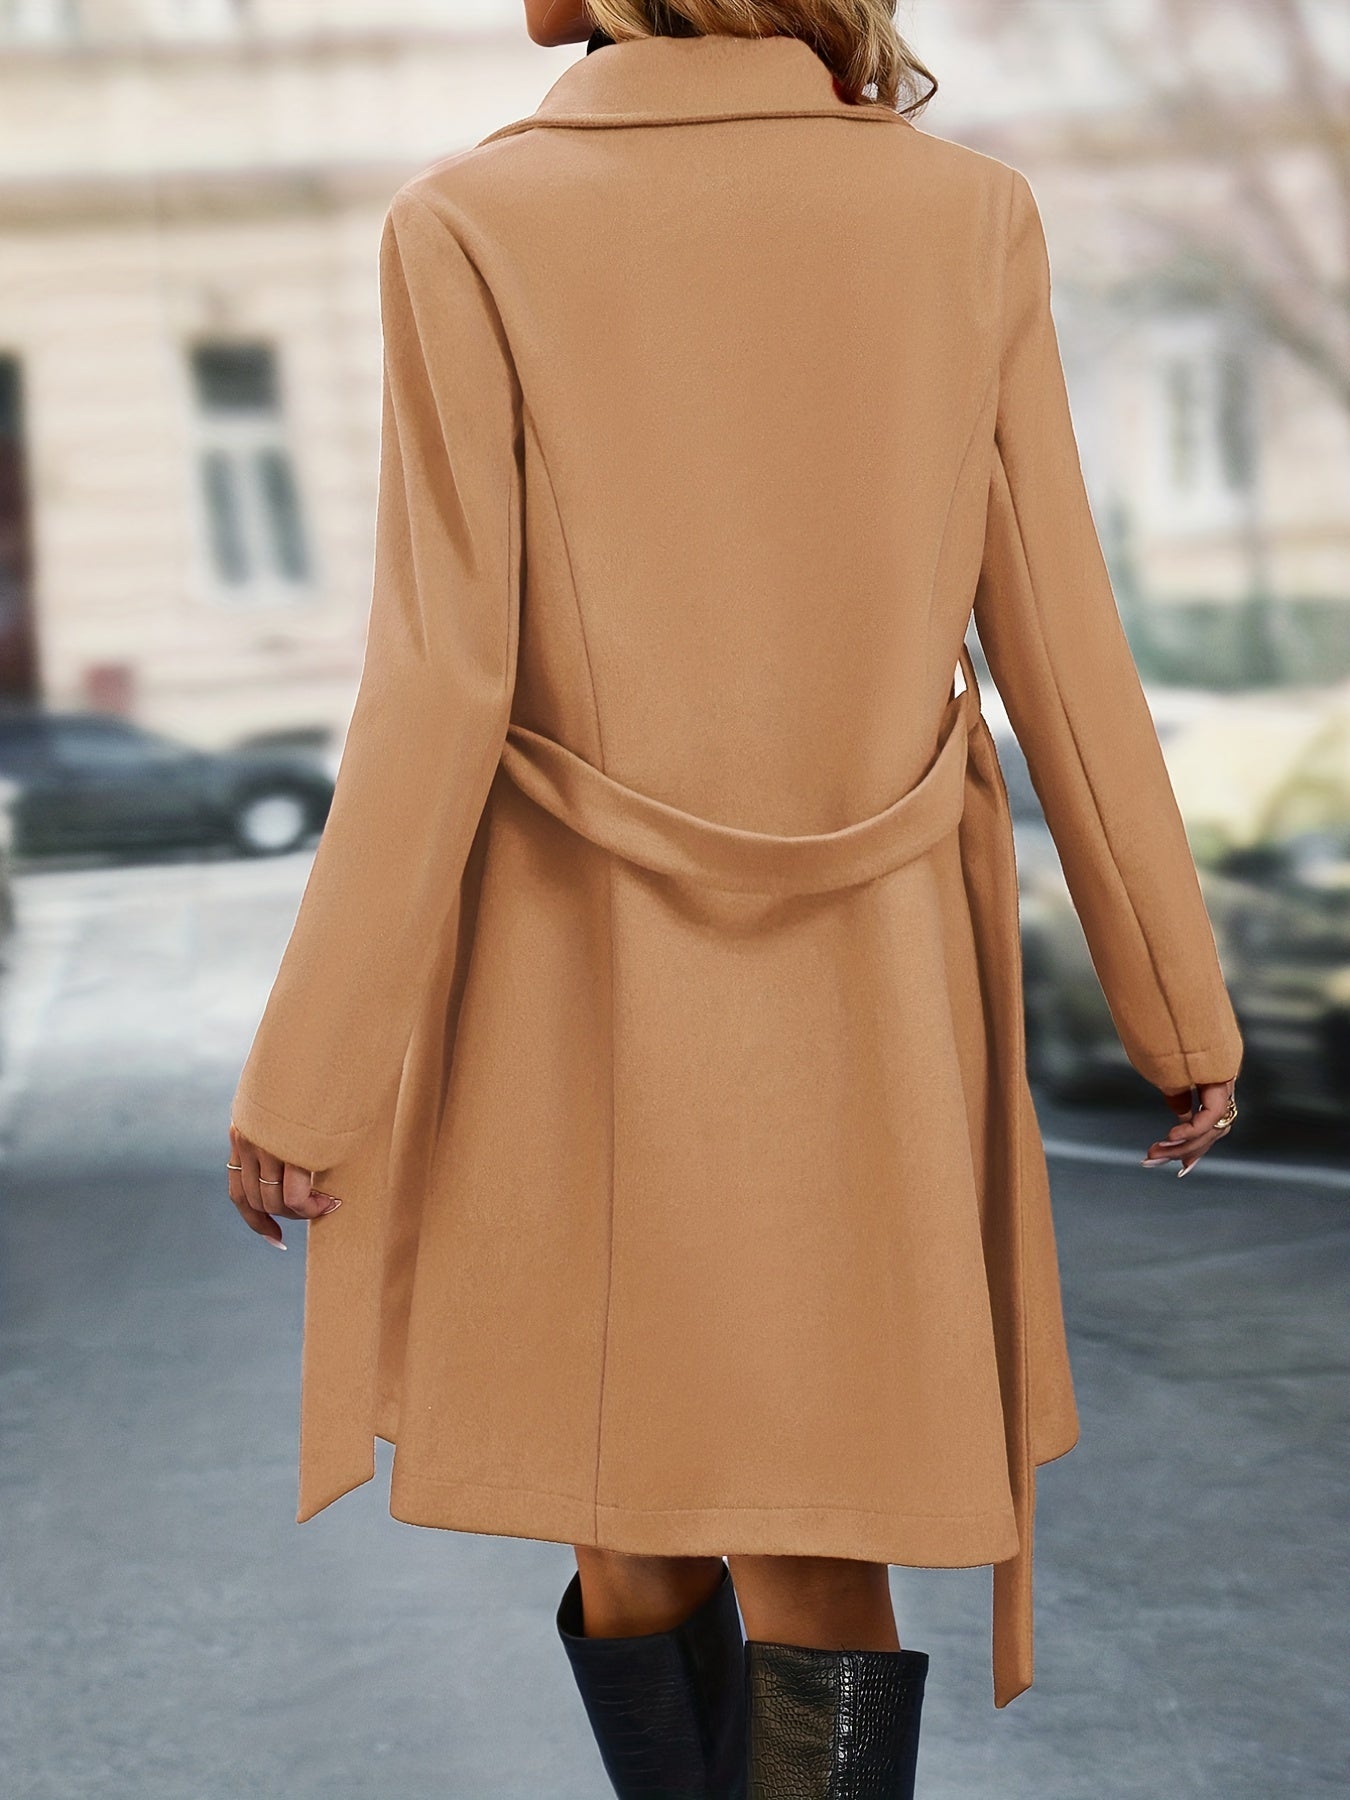 Classic Women's Trench Coats" and "Stylish Women's Trench Coats - -CasualFlowshop 